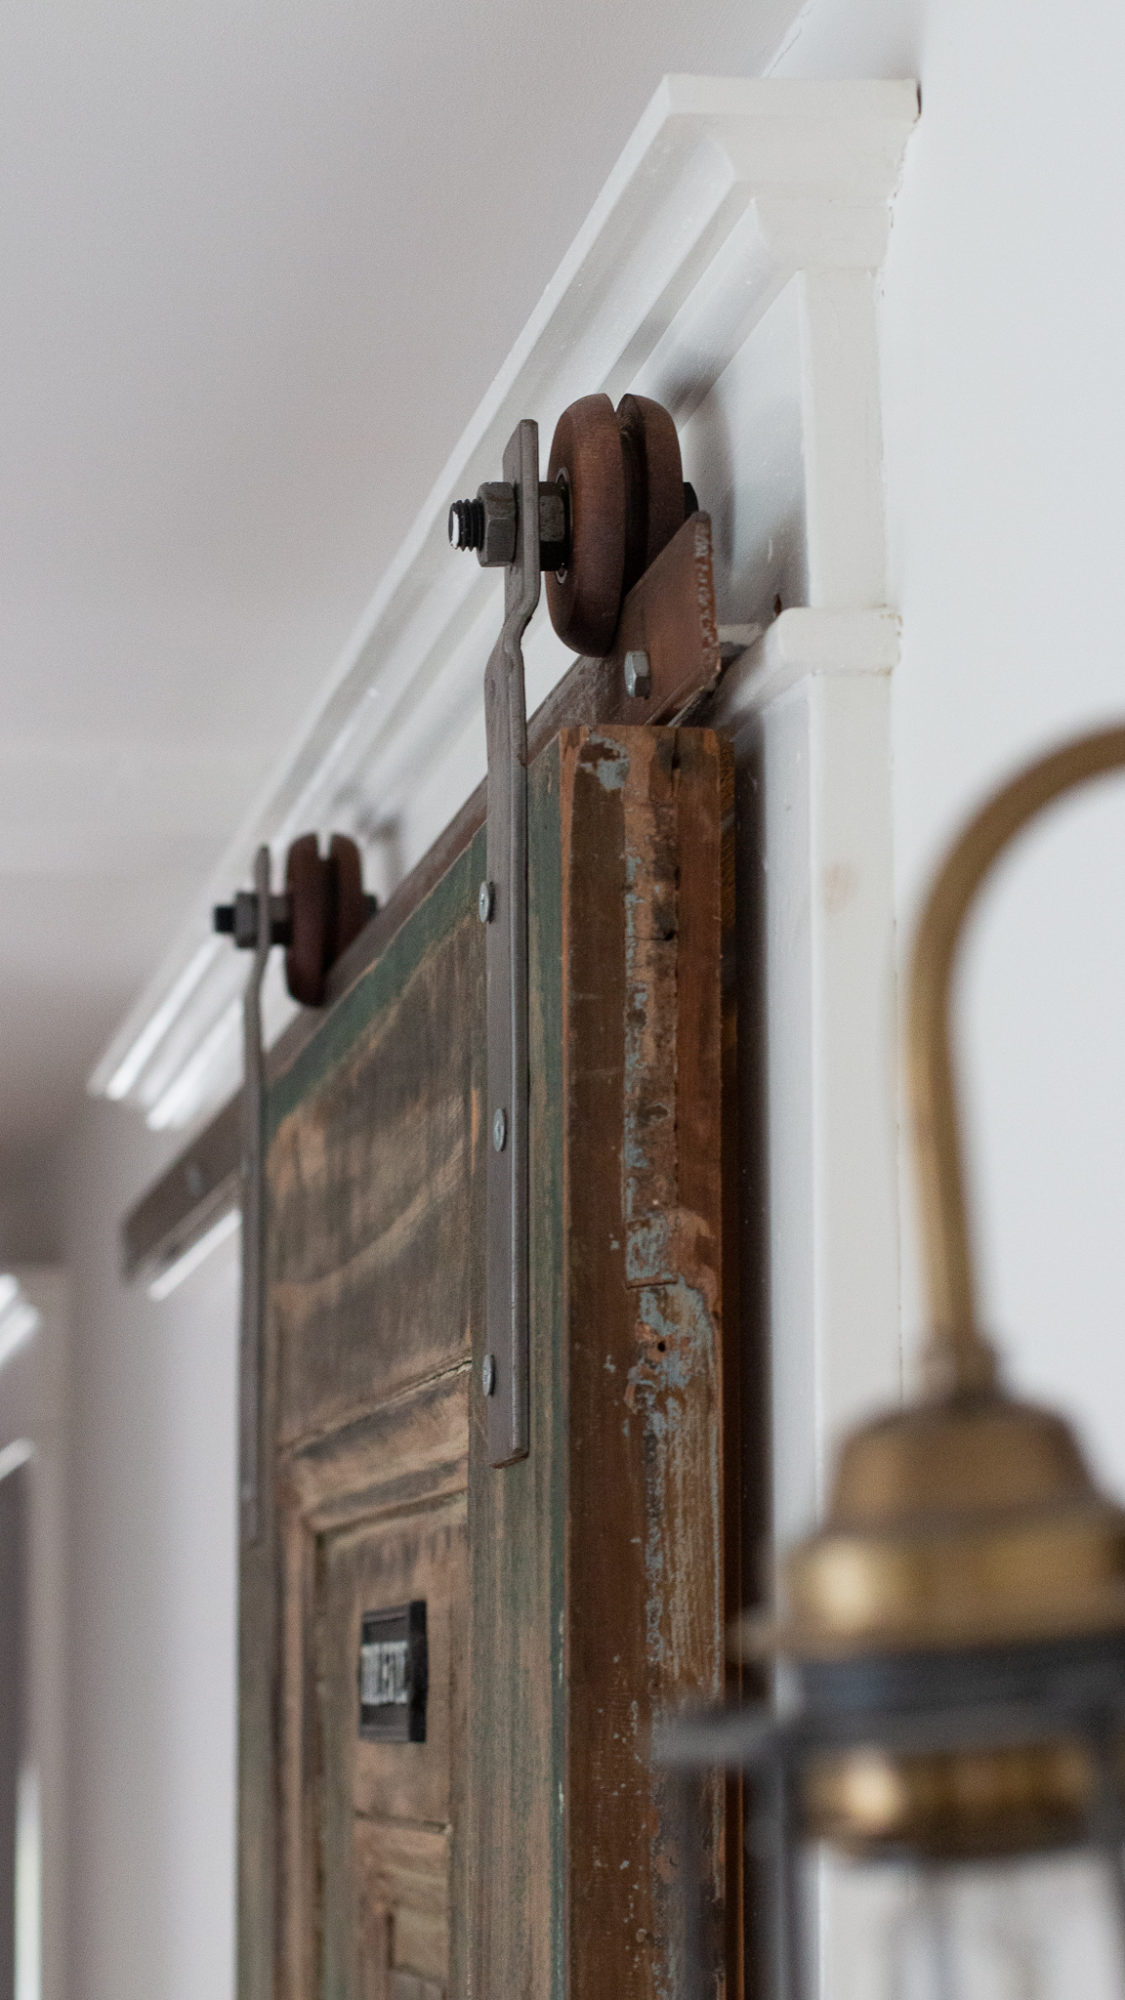 How To Make Your Own Barn Door Track Hardware Design The Life You Want To Live